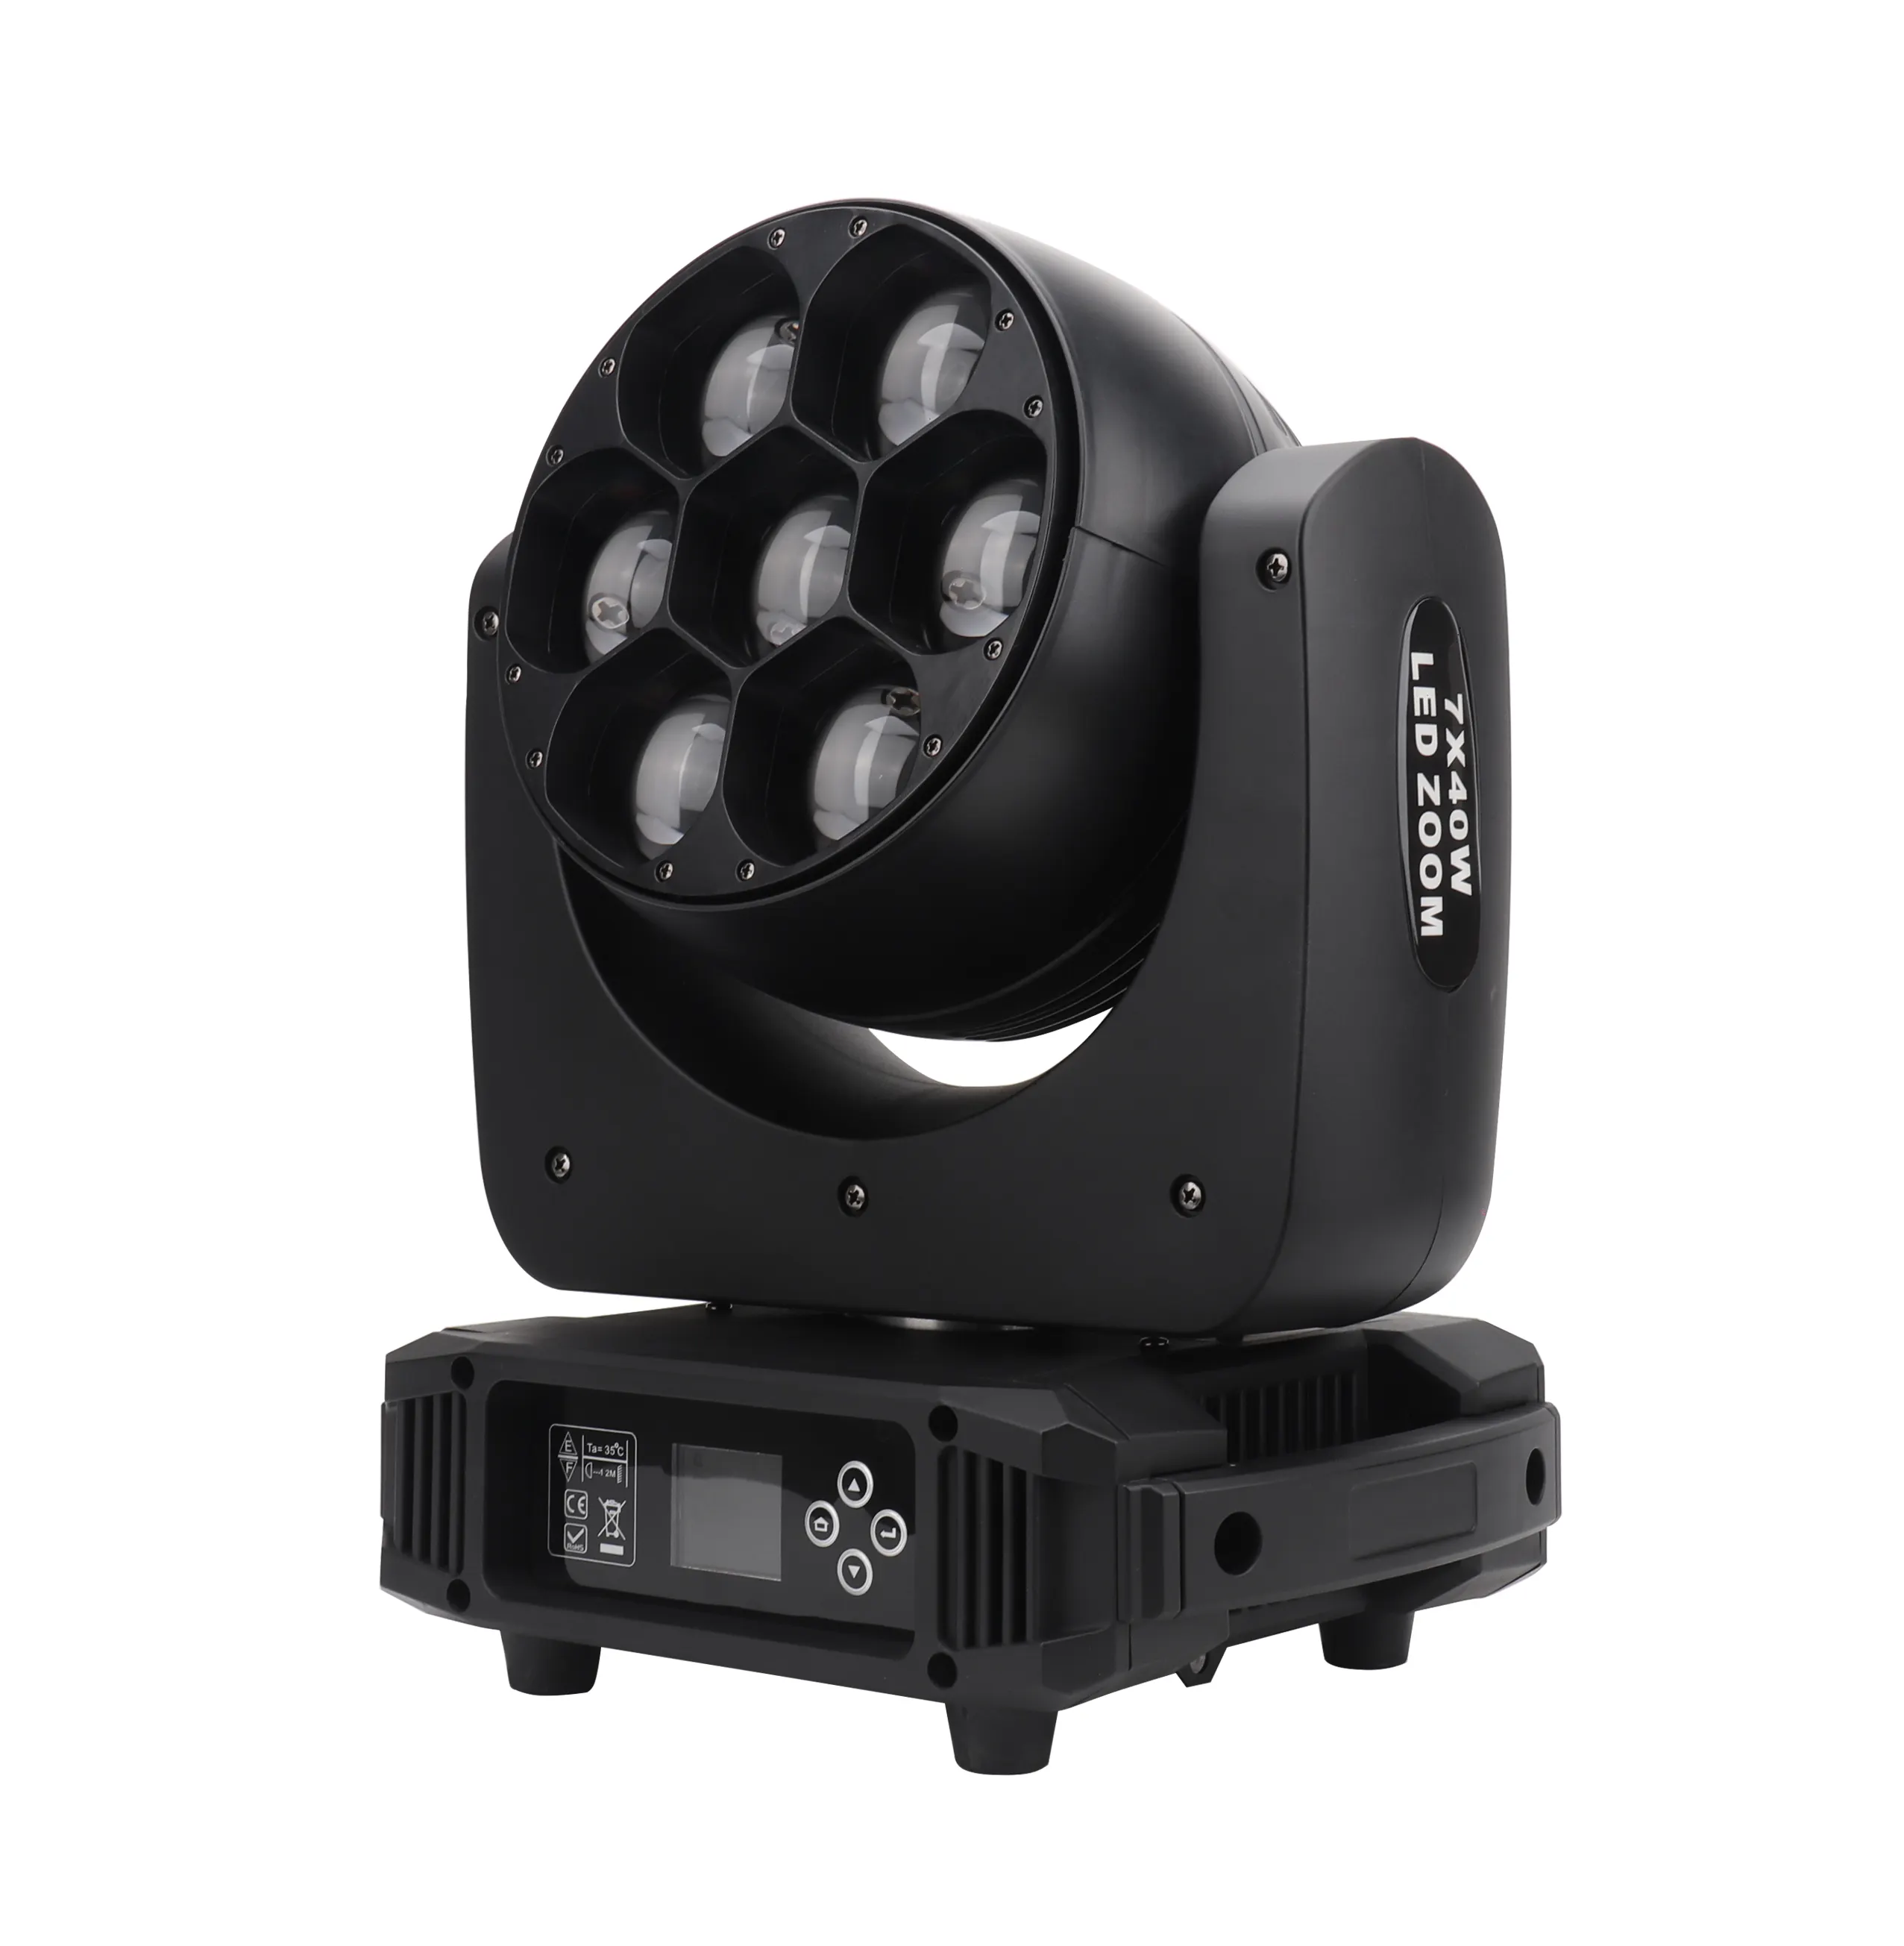 7x10W RGBW 4In1 LED Mini Bee Eye Beam Light DMX512 Moving Head Light DJ/Fest/Home /Show /Bar/Stage /Party Light Stage Machine